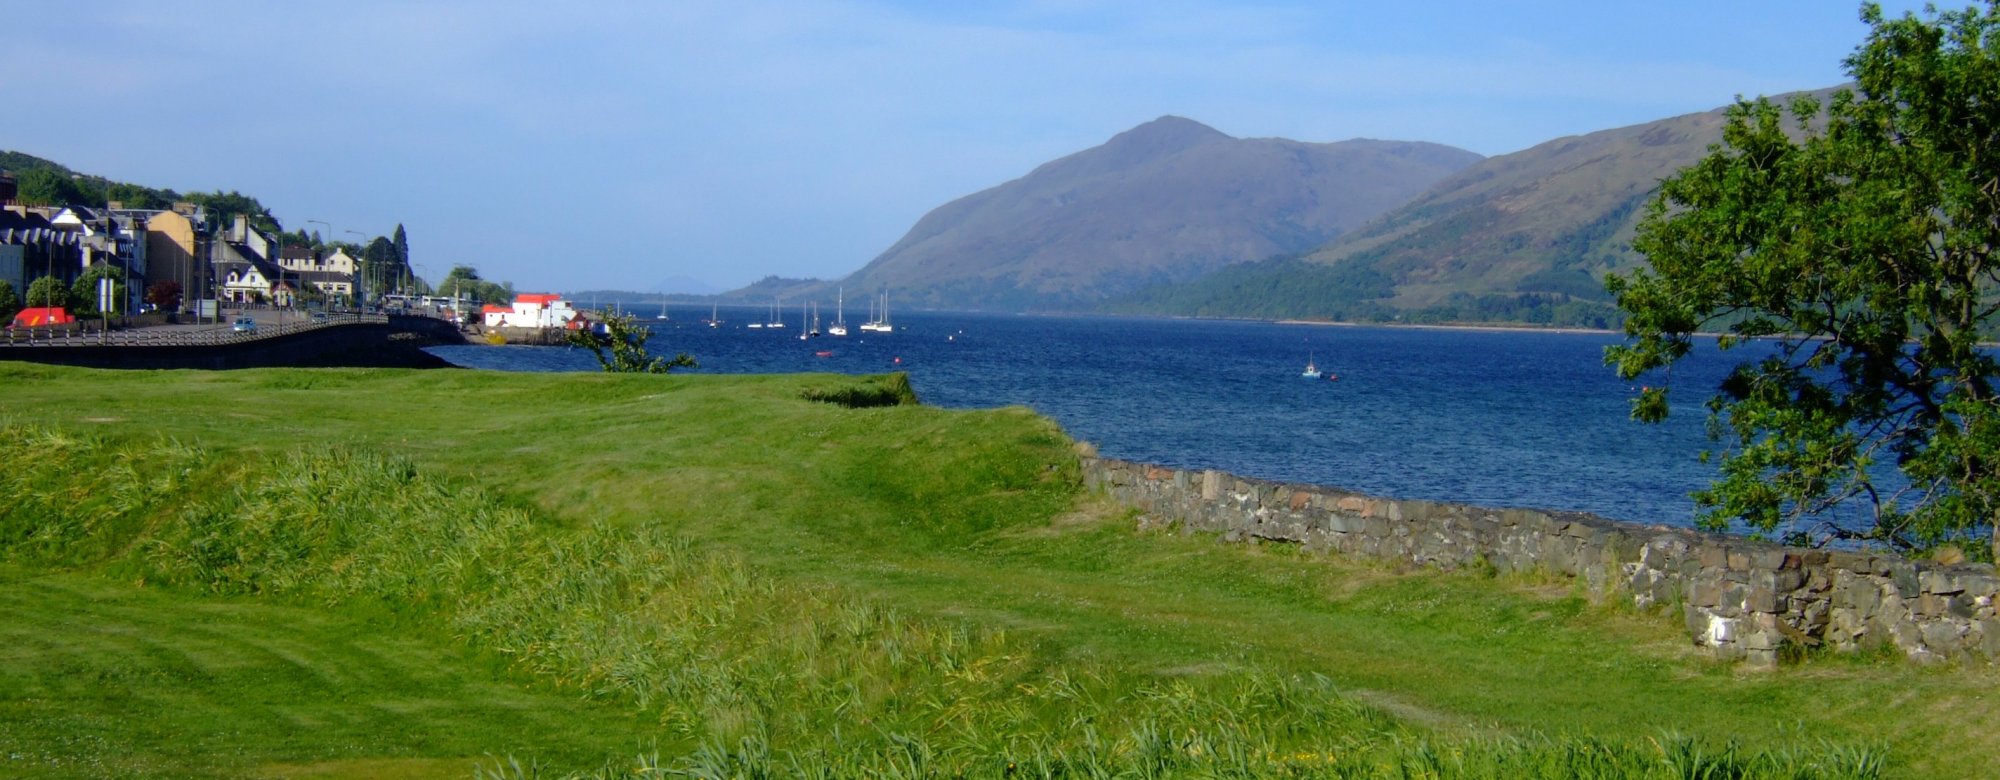 Looking south west down Loch Linnhe, from the monolith marking the start of the Great Glen Way